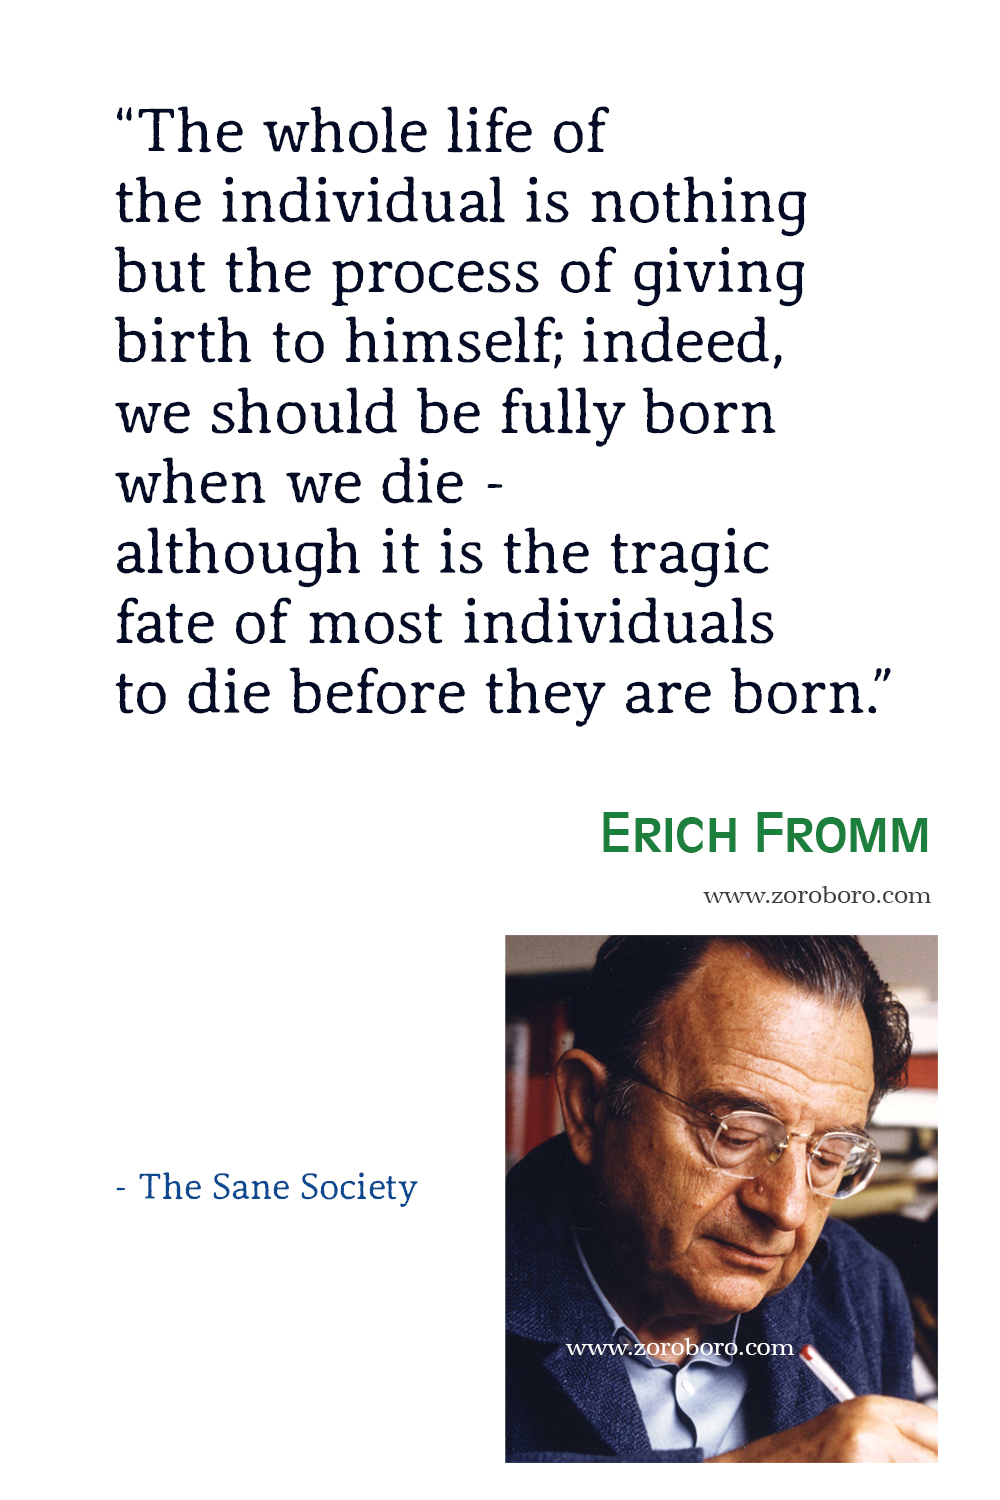 Erich Fromm Quotes, Erich Fromm Art of love Quotes, Erich Fromm Books Quotes, Erich Fromm The Sane Society, Erich Fromm Escape from Freedom Quotes.